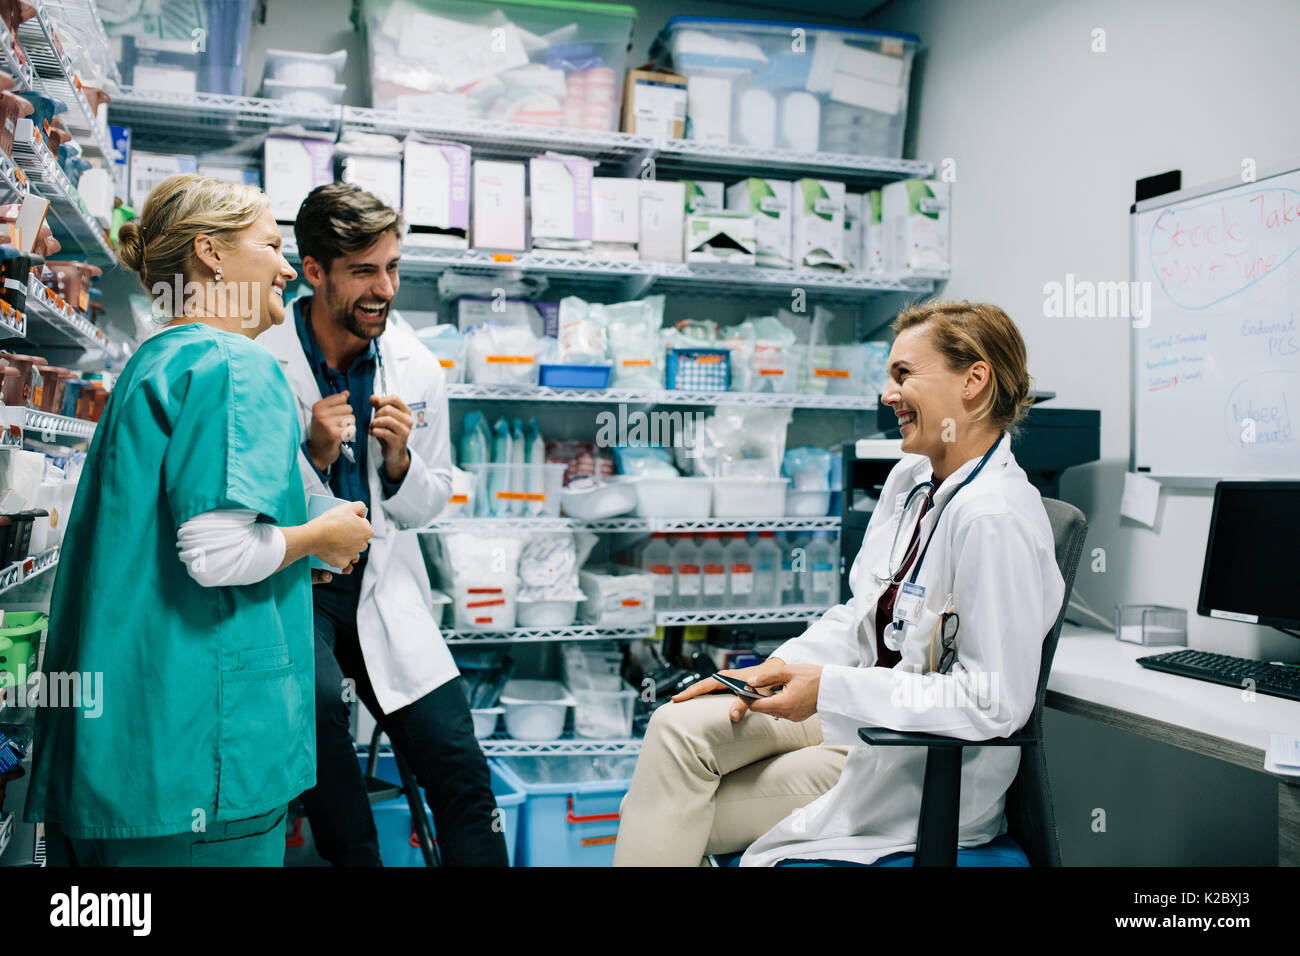 Hospital staff having casual discussion in the pharmacy. Three colleagues meeting in drugstore and laughing. Stock Photo